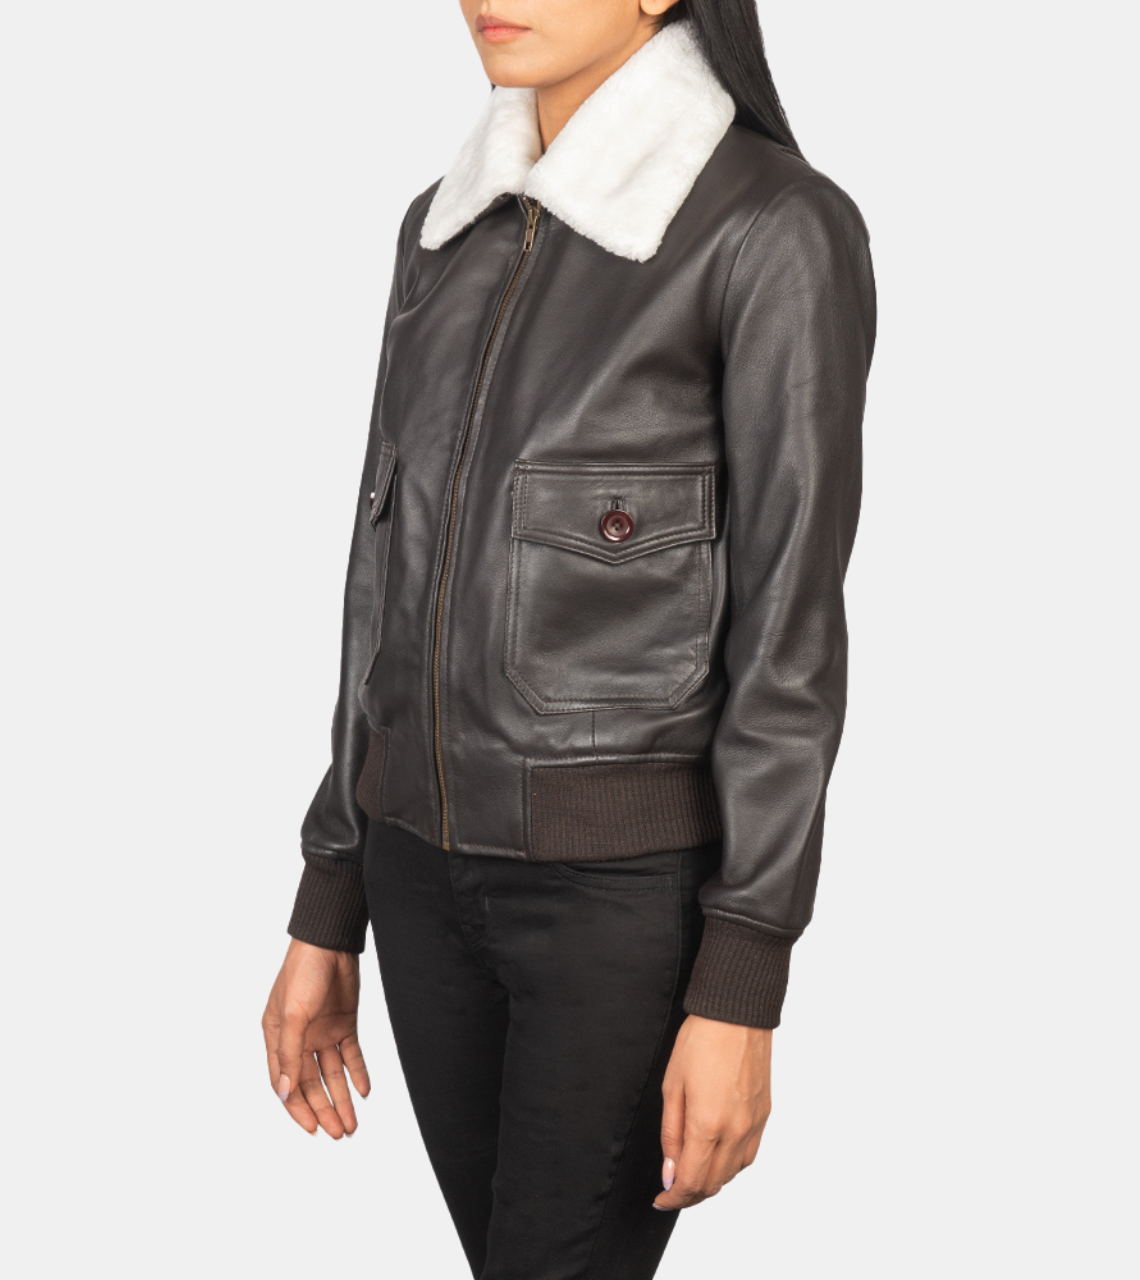 Hendrix Tan Brown Bomber Shearling Leather Jacket For Women's